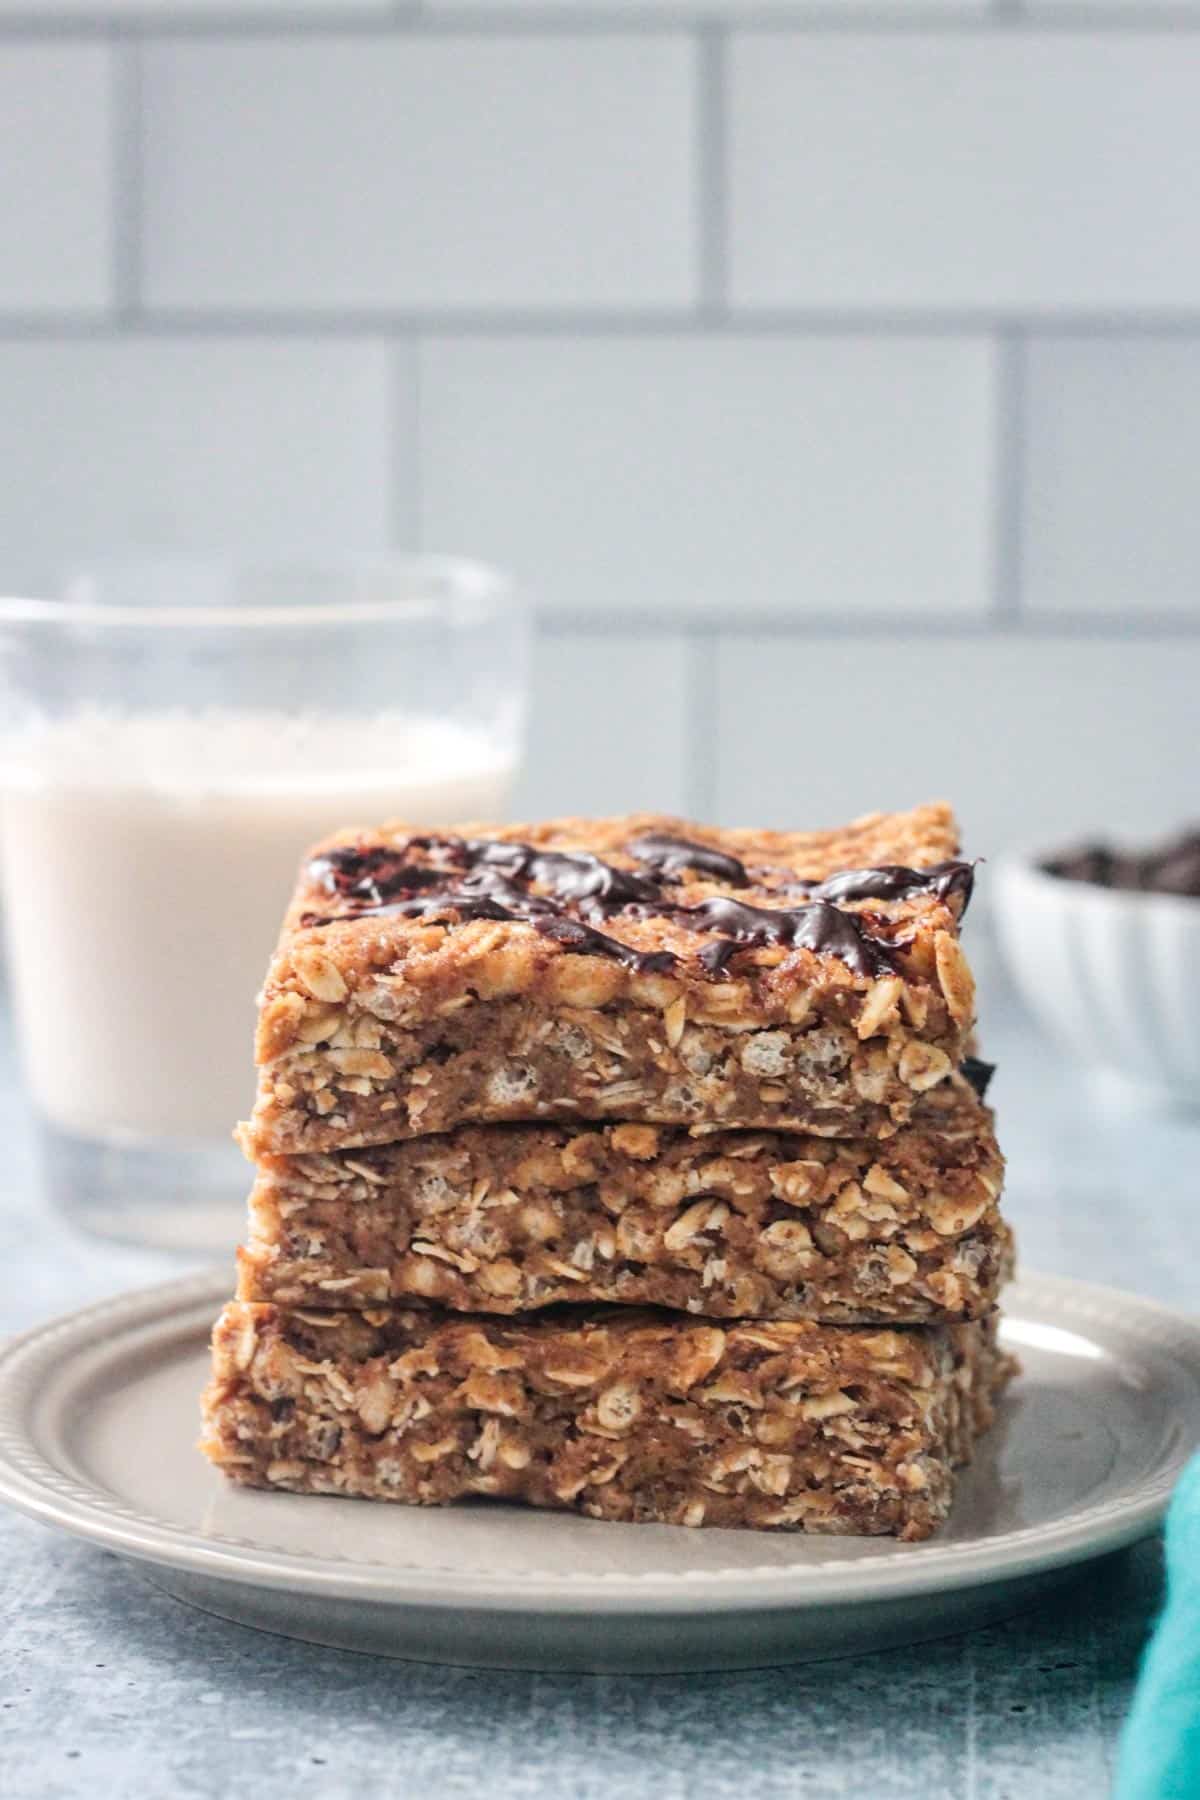 Stack of 3 peanut butter oatmeal bars.